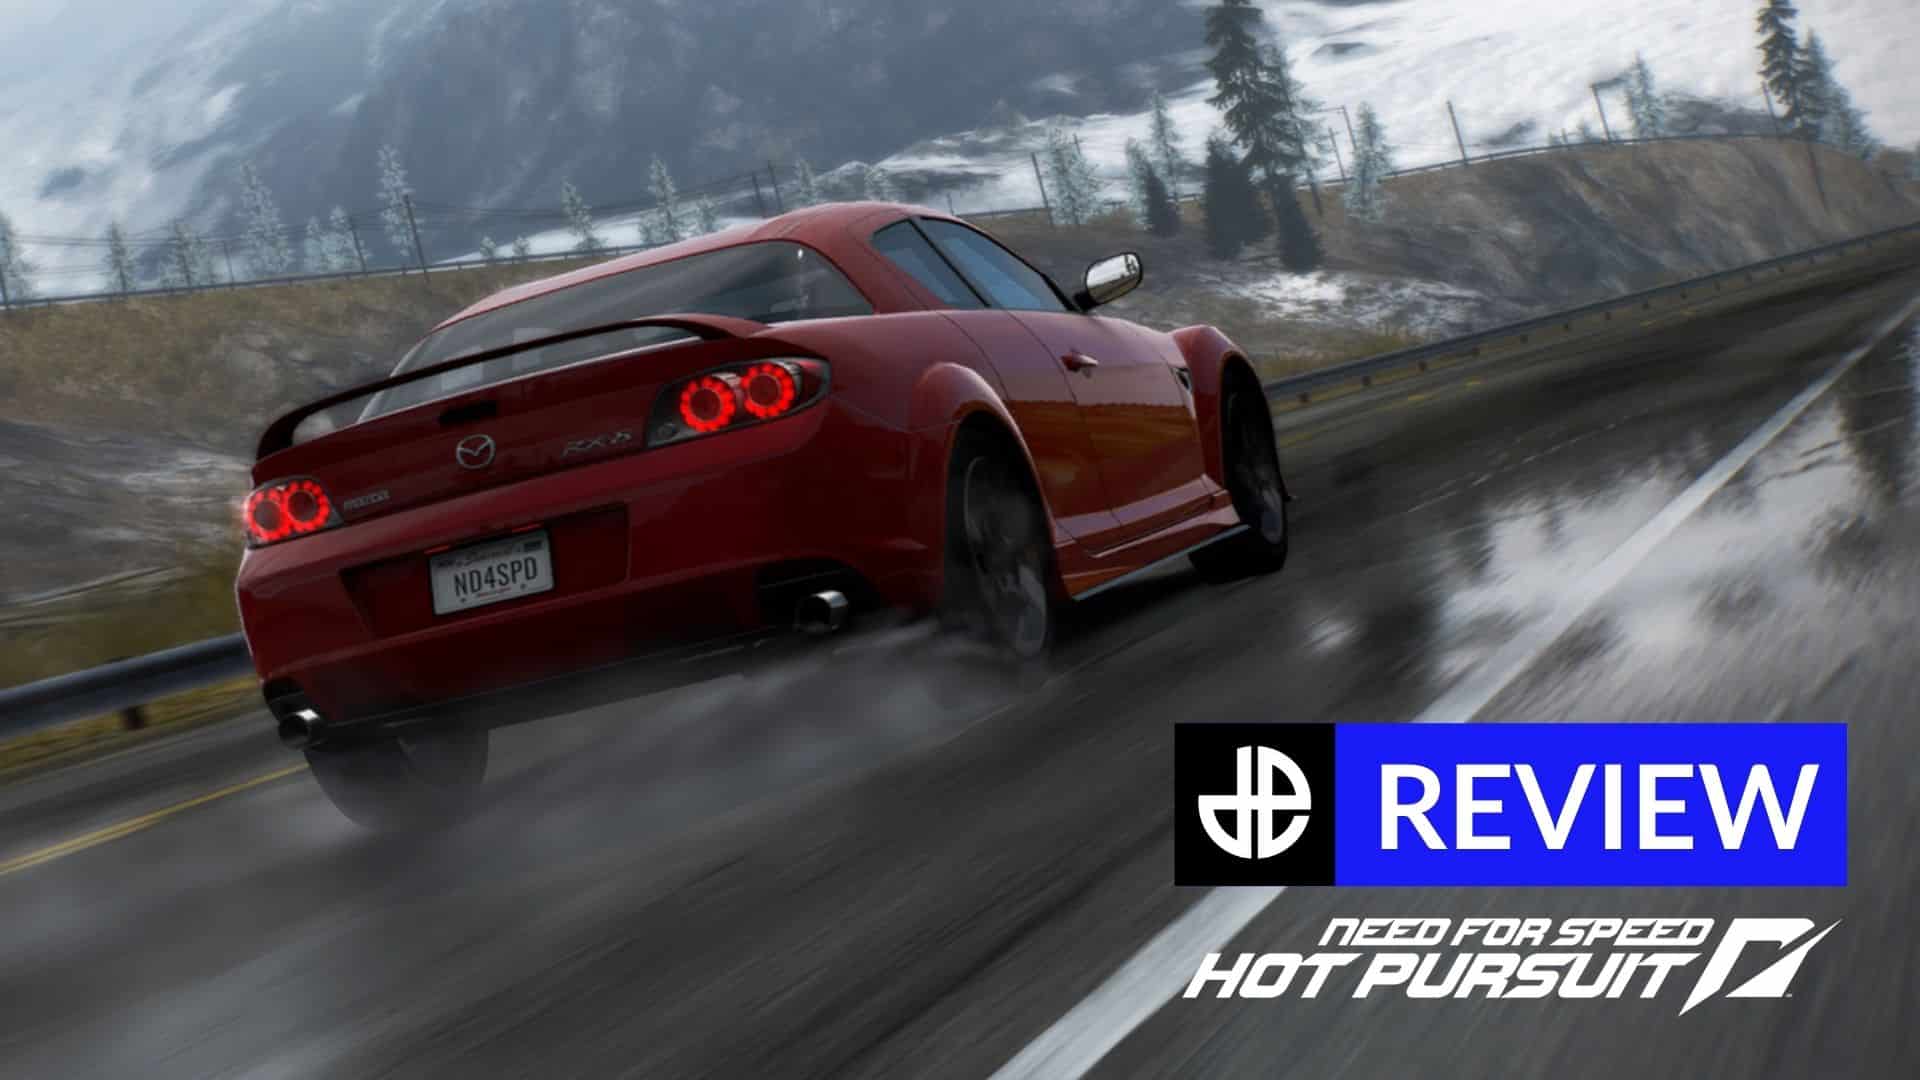 Need for speed review